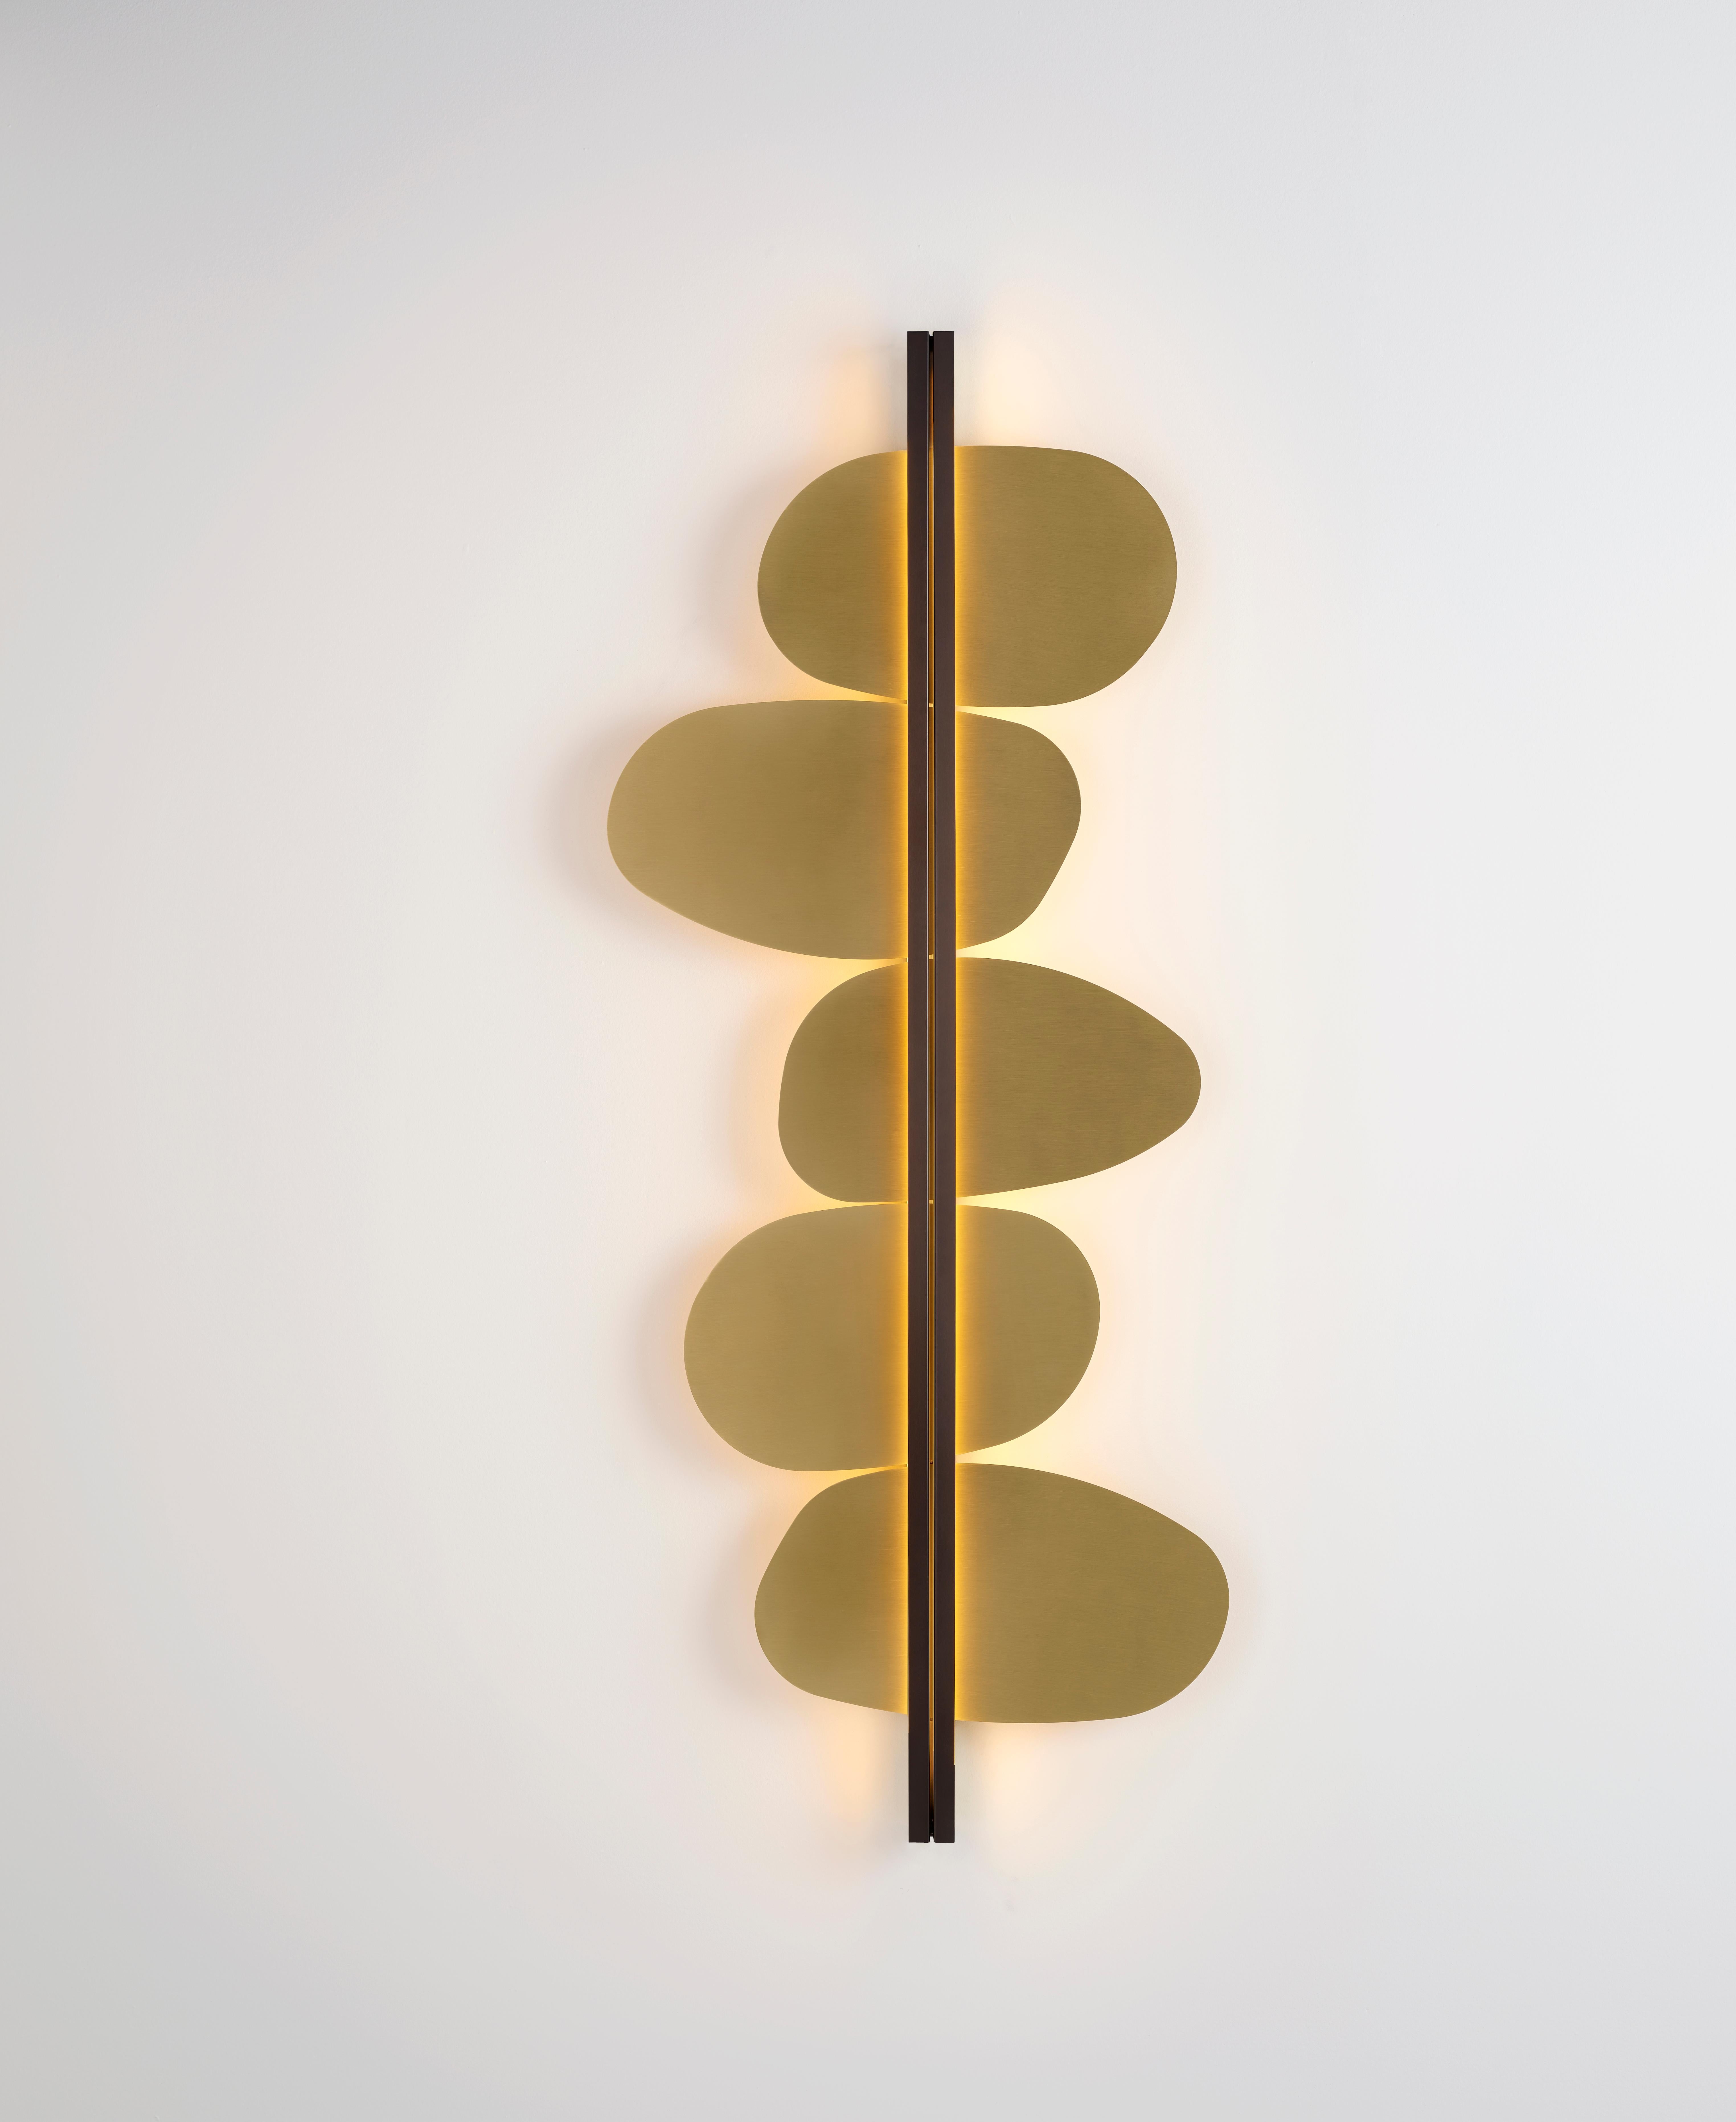 Strate stone wall light by Emilie Cathelineau
Dimensions: W 62.2 x D 8.7 x H 150 cm
Materials: Solid brass, Polycarbonate diffuser.
Others finishes and dimensions are available.

All our lamps can be wired according to each country. If sold to